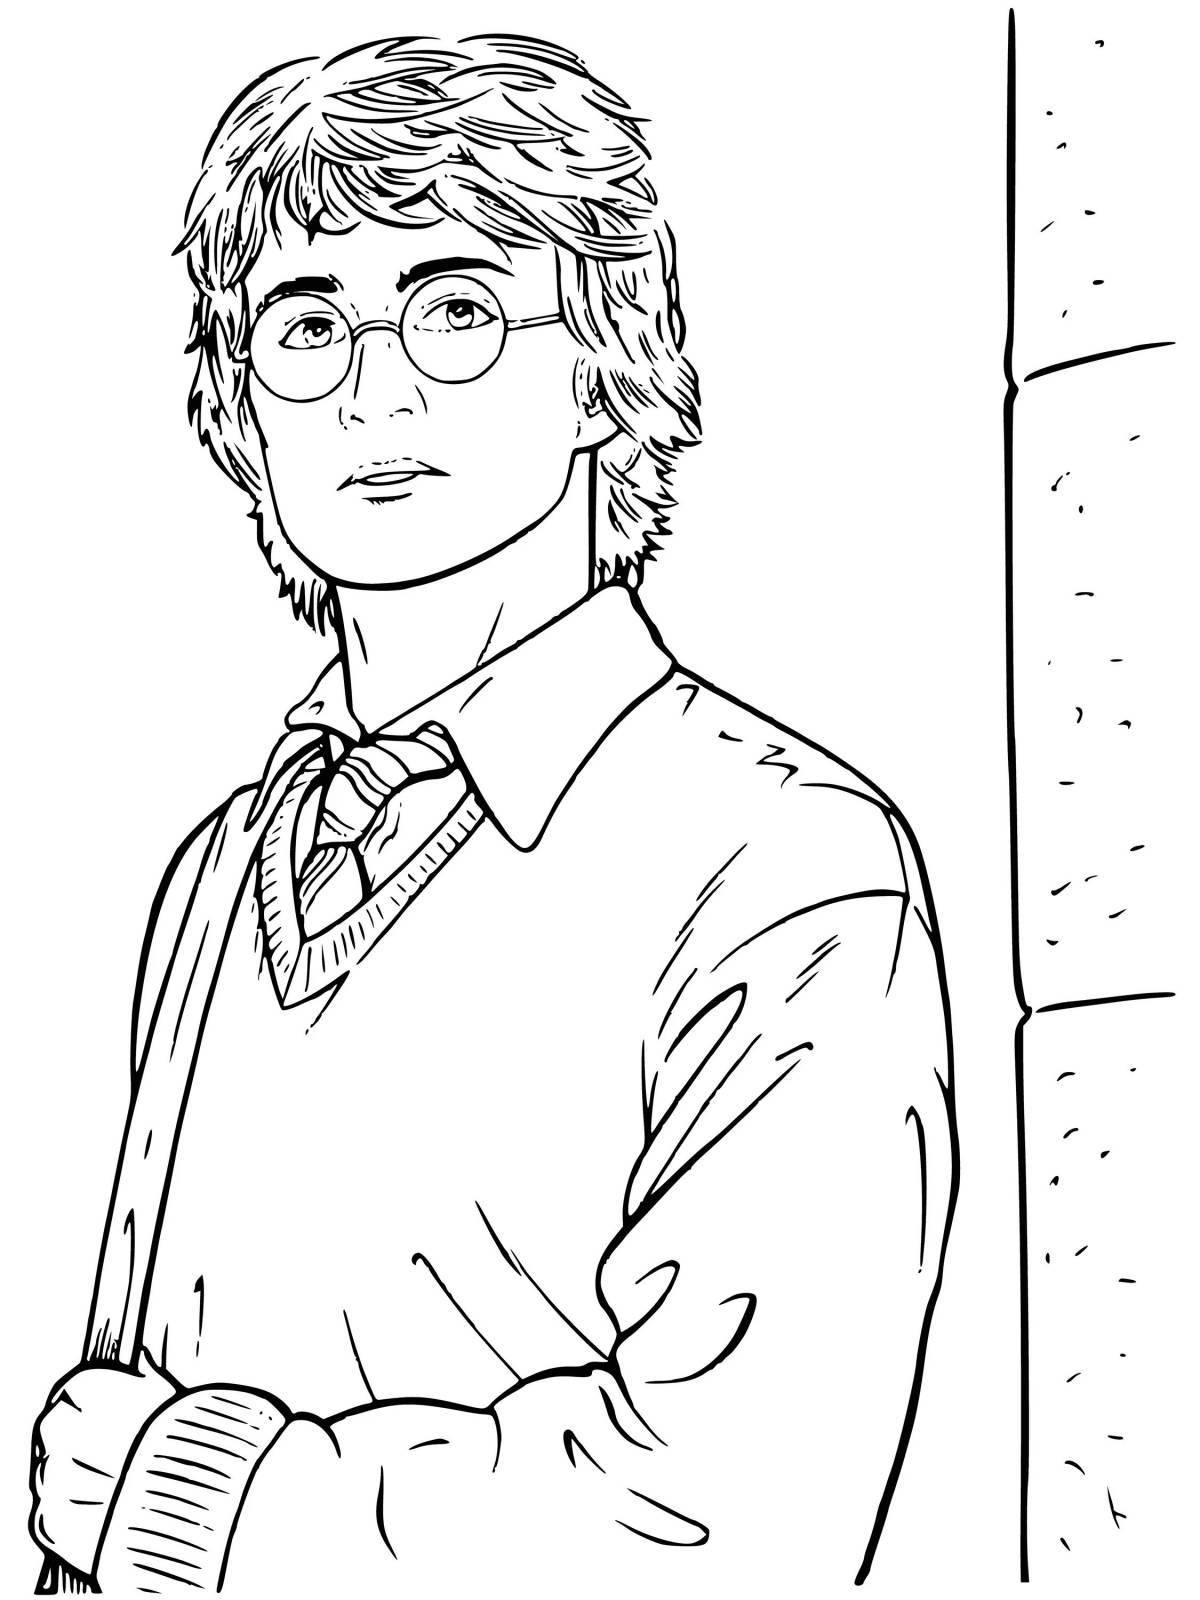 Charming harry potter coloring book